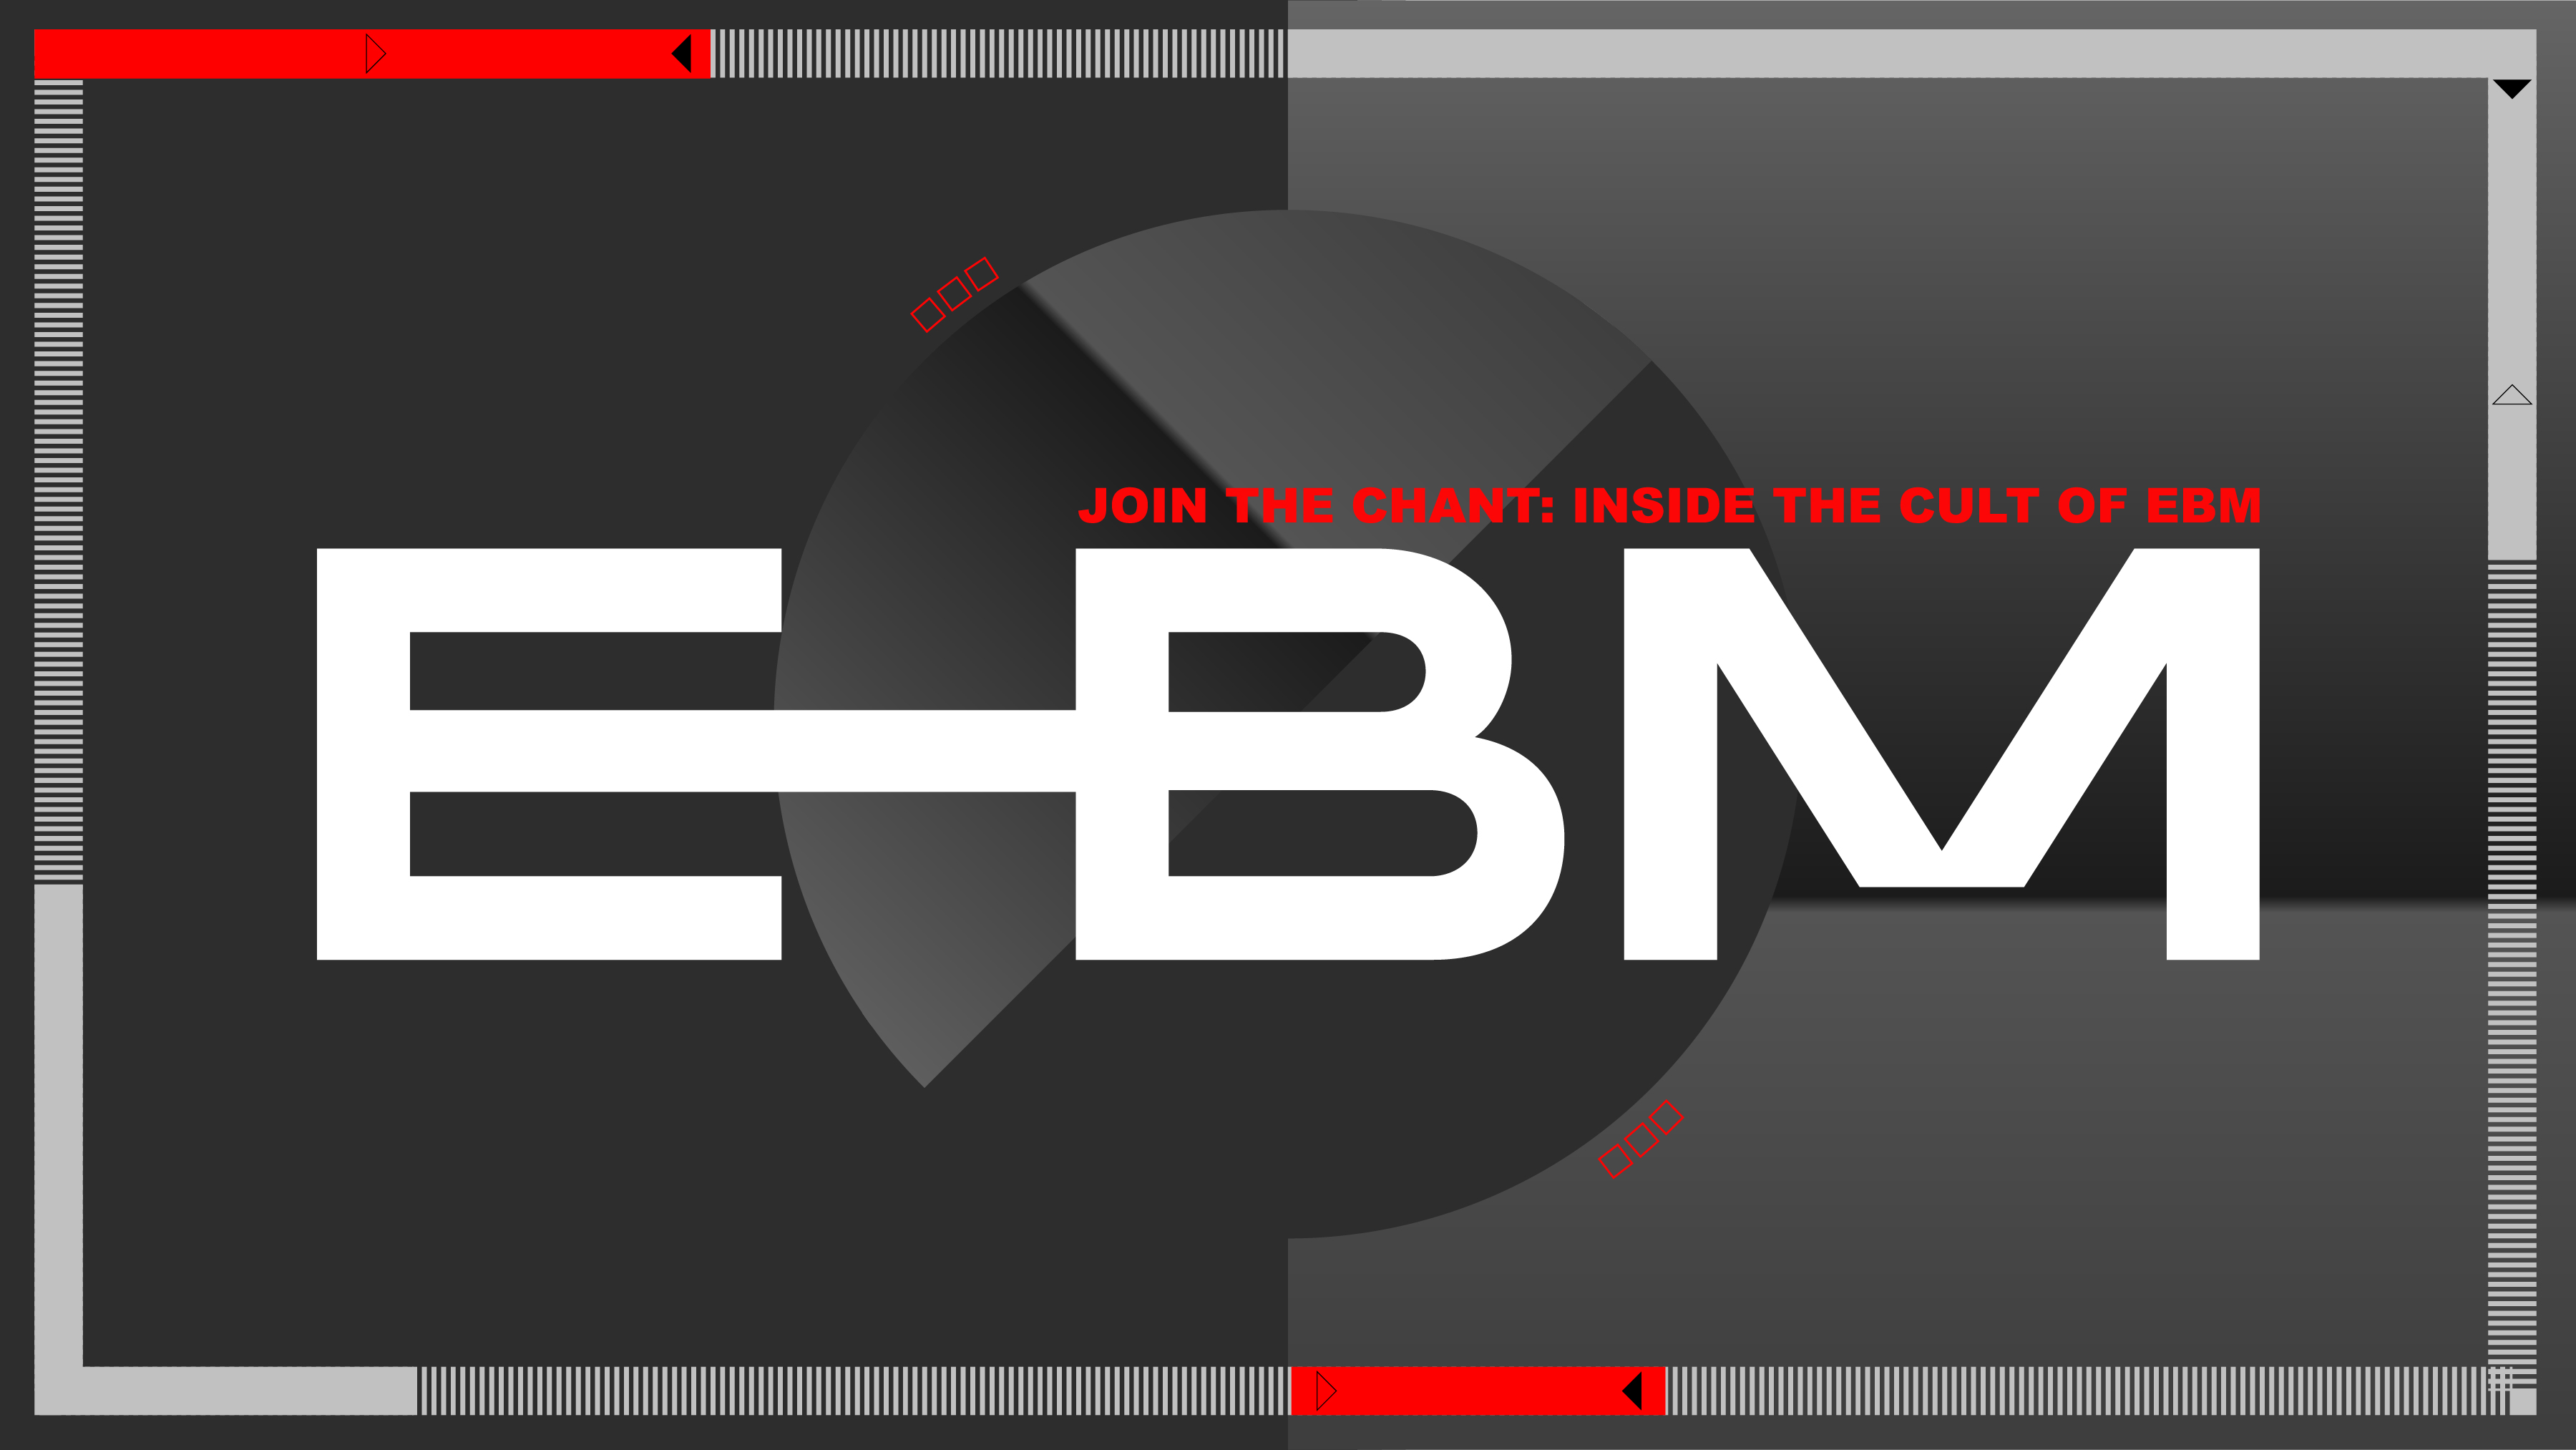 Join in the chant: Inside the cult of EBM